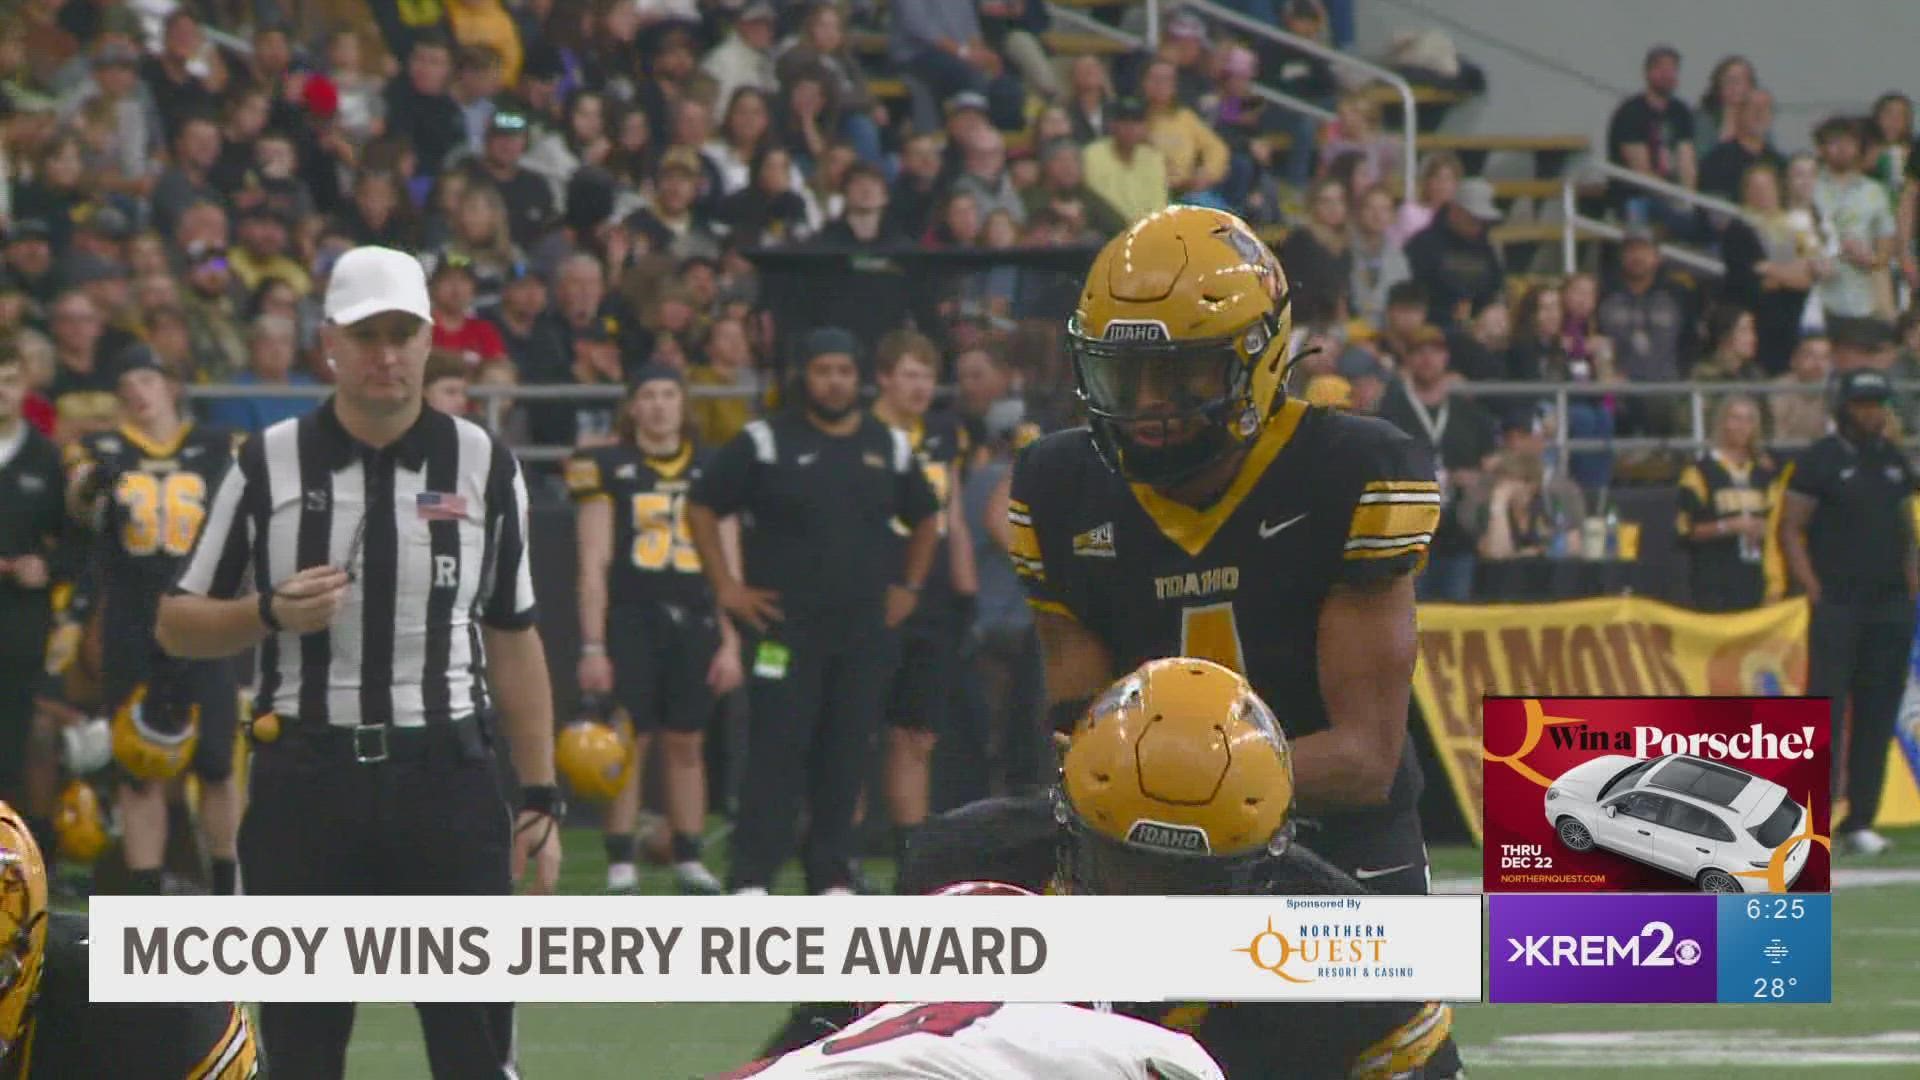 Idaho quarterback Gevani McCoy beat out 25 finalists for the Jerry Rice Award given to the top freshman in FCS football.